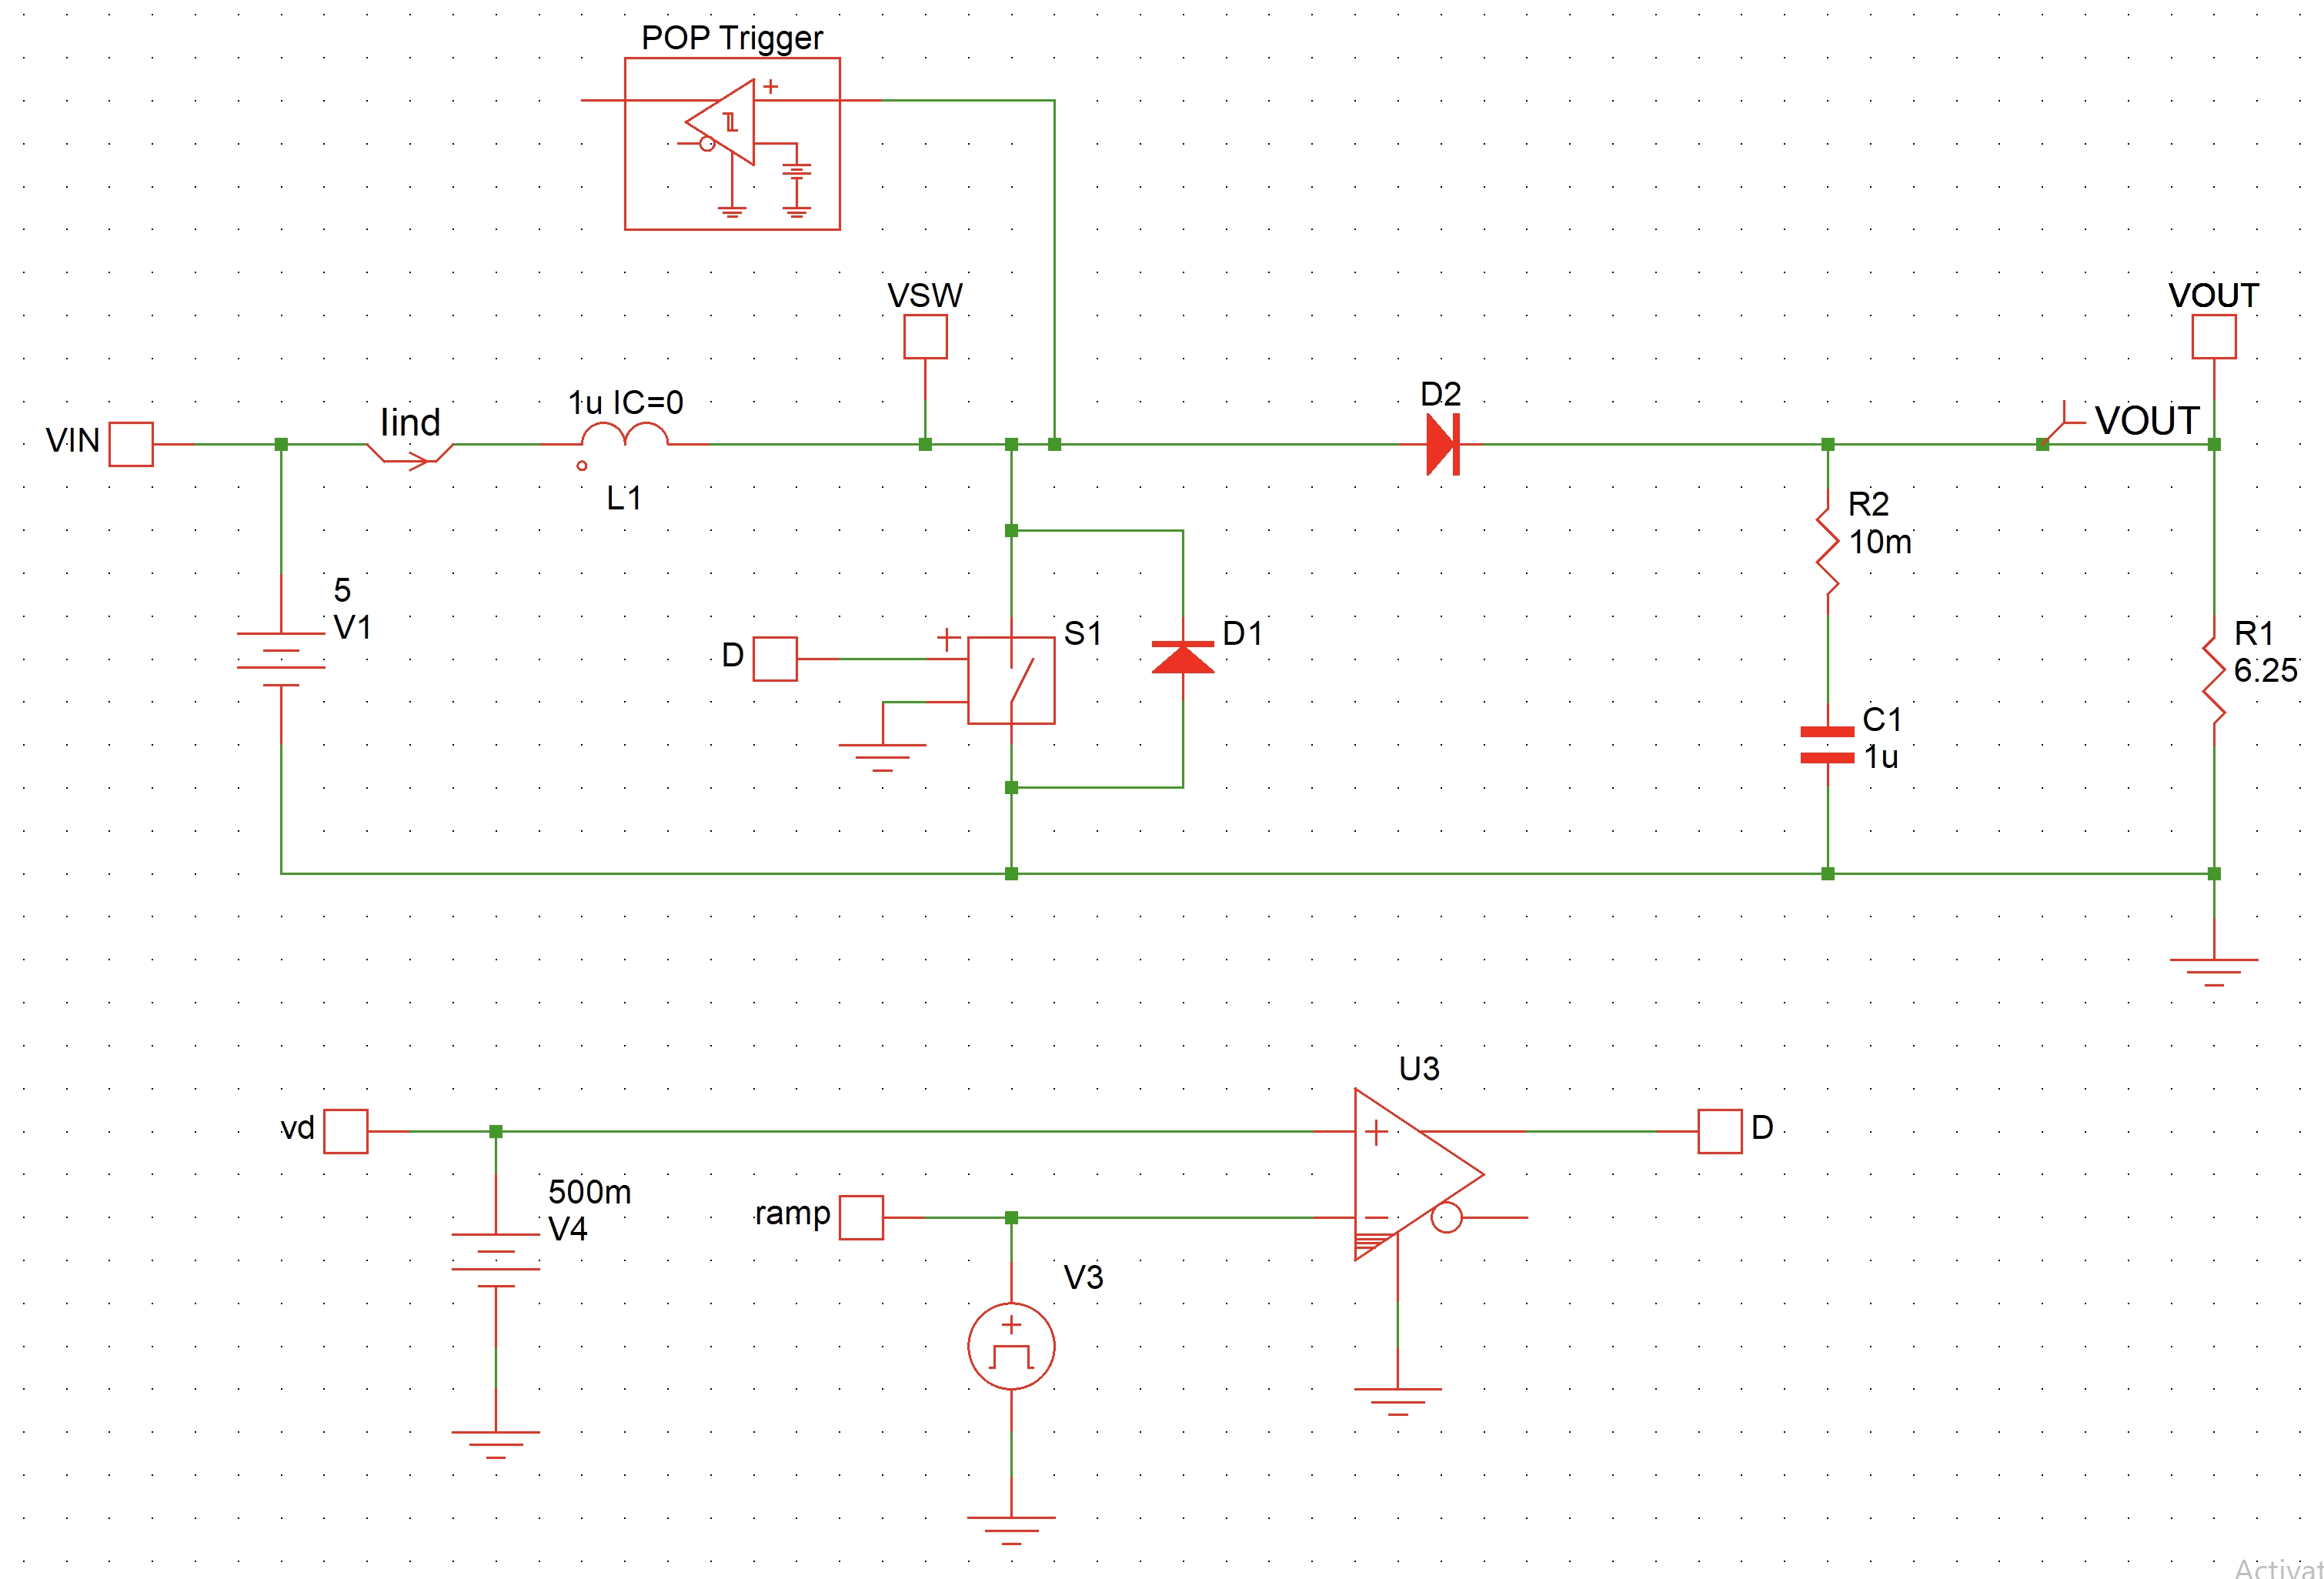 Asynchronous Boost converter test bench in Simplis